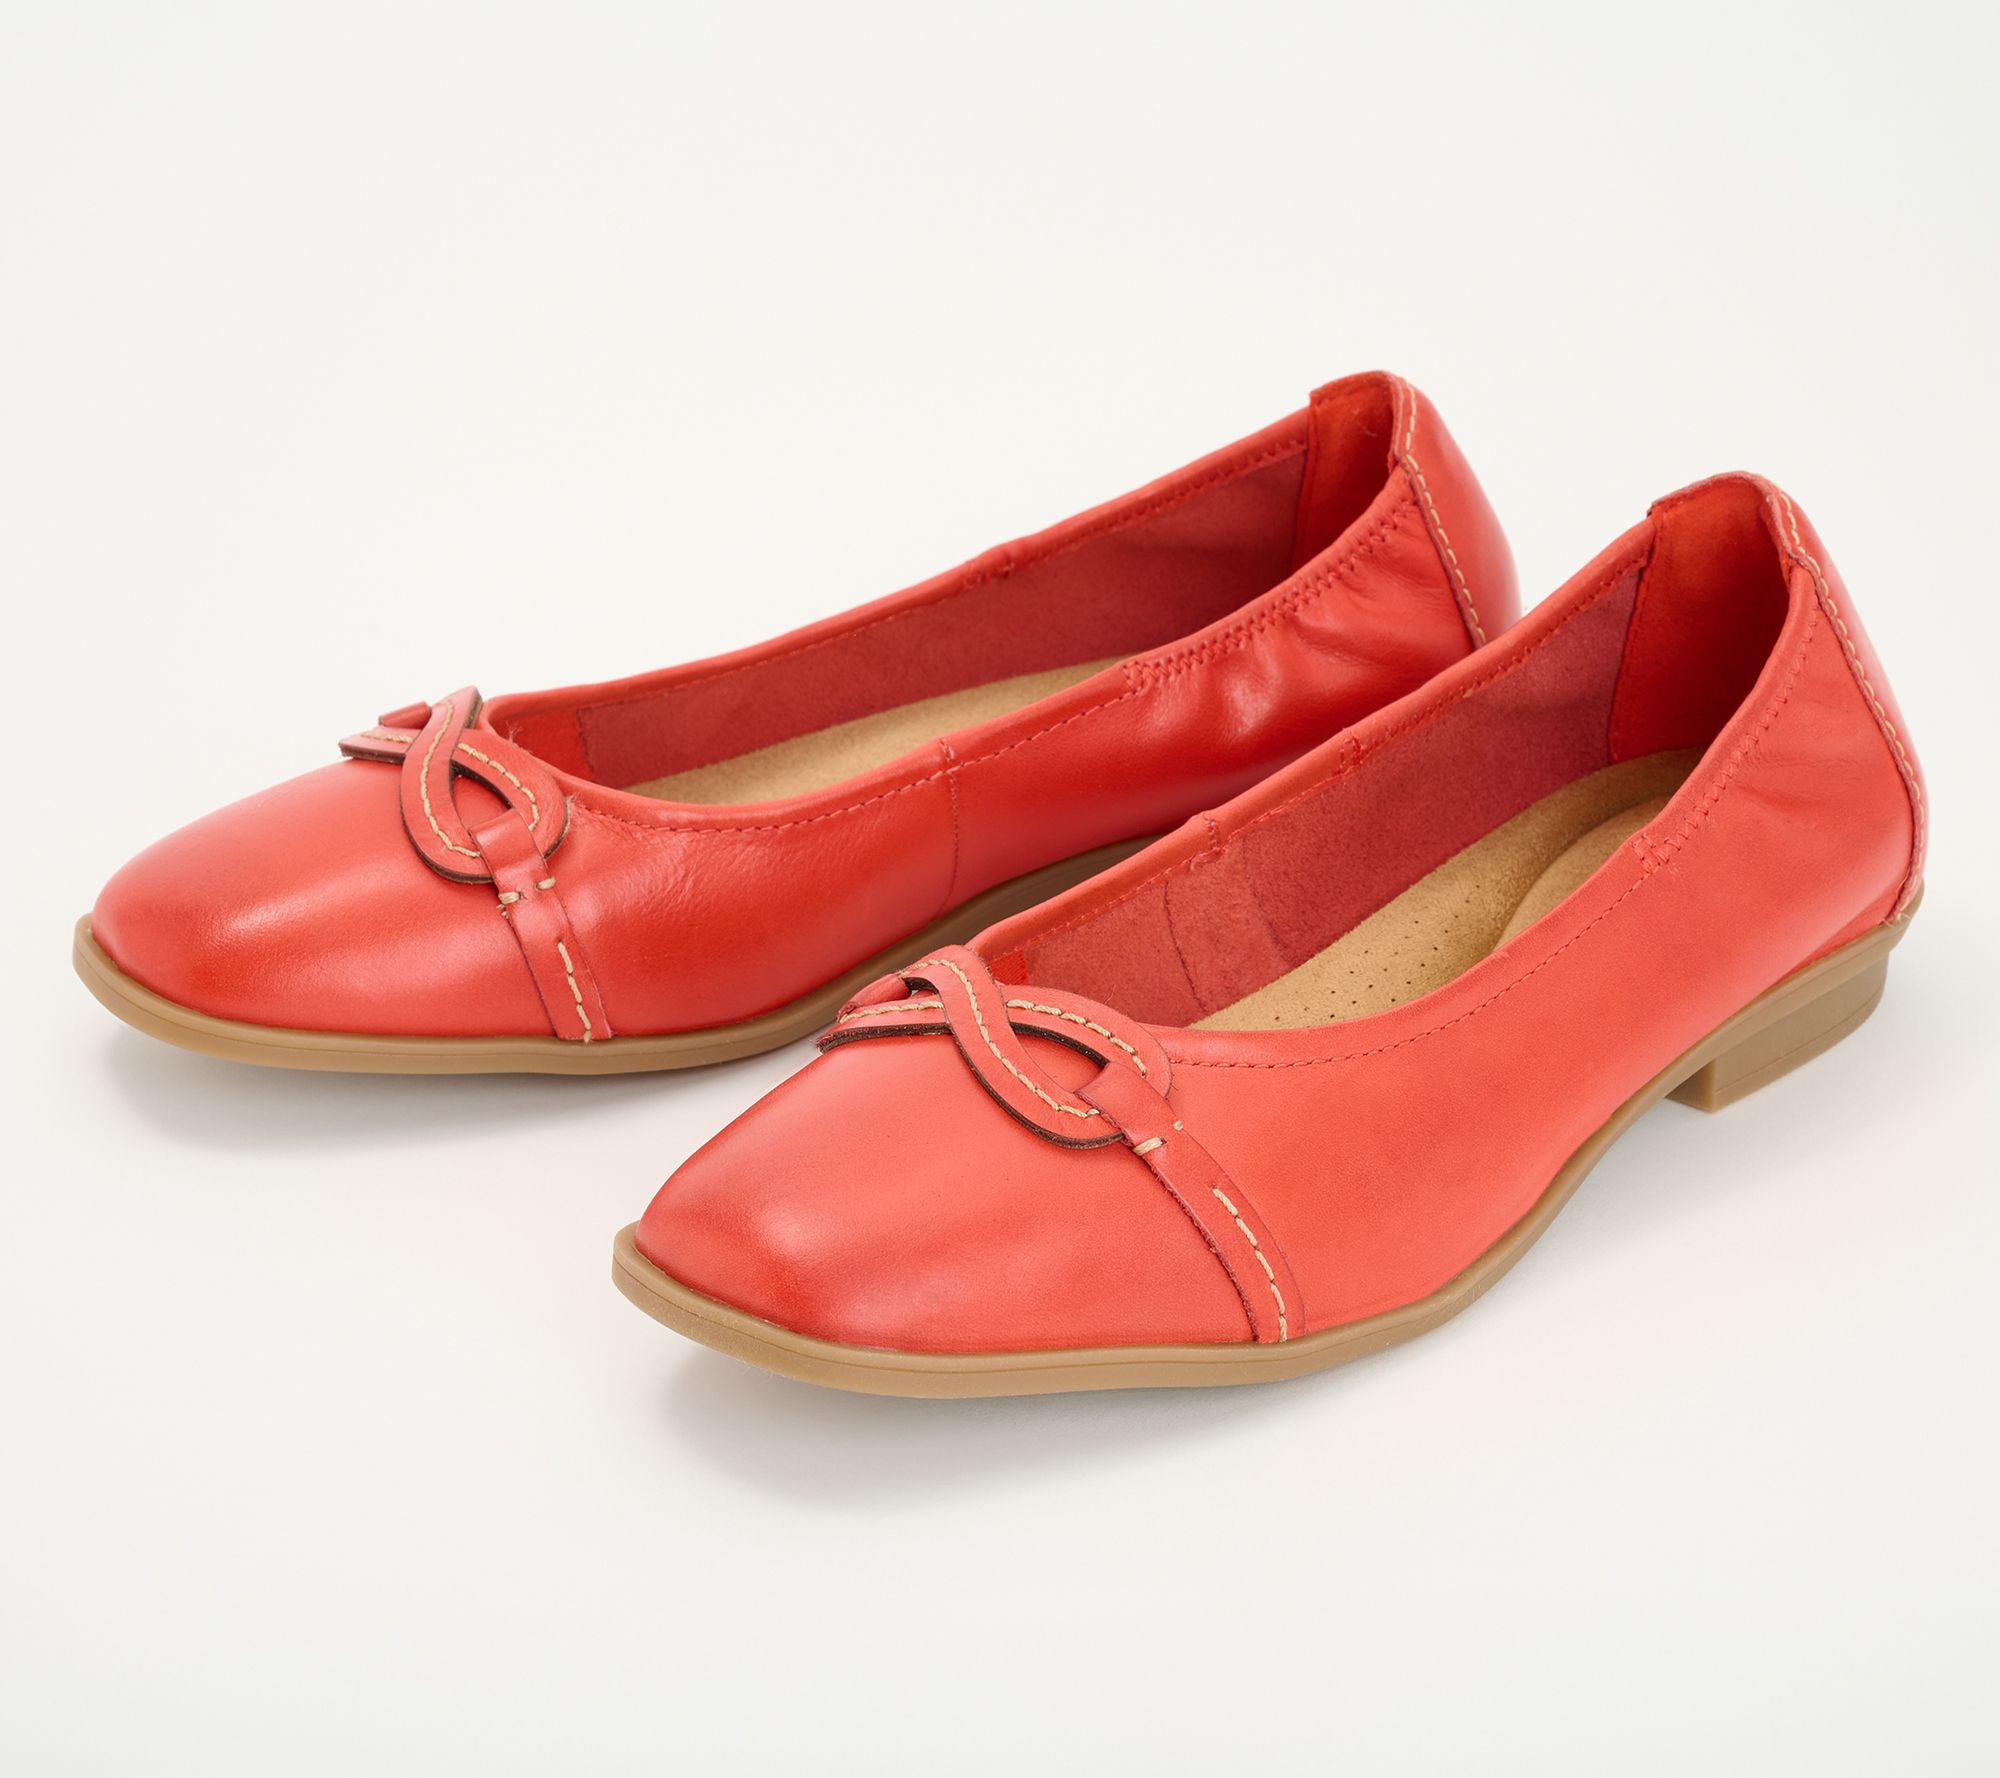 Clarks Collection Leather Ballet Flats Lyrical Rhyme - QVC.com